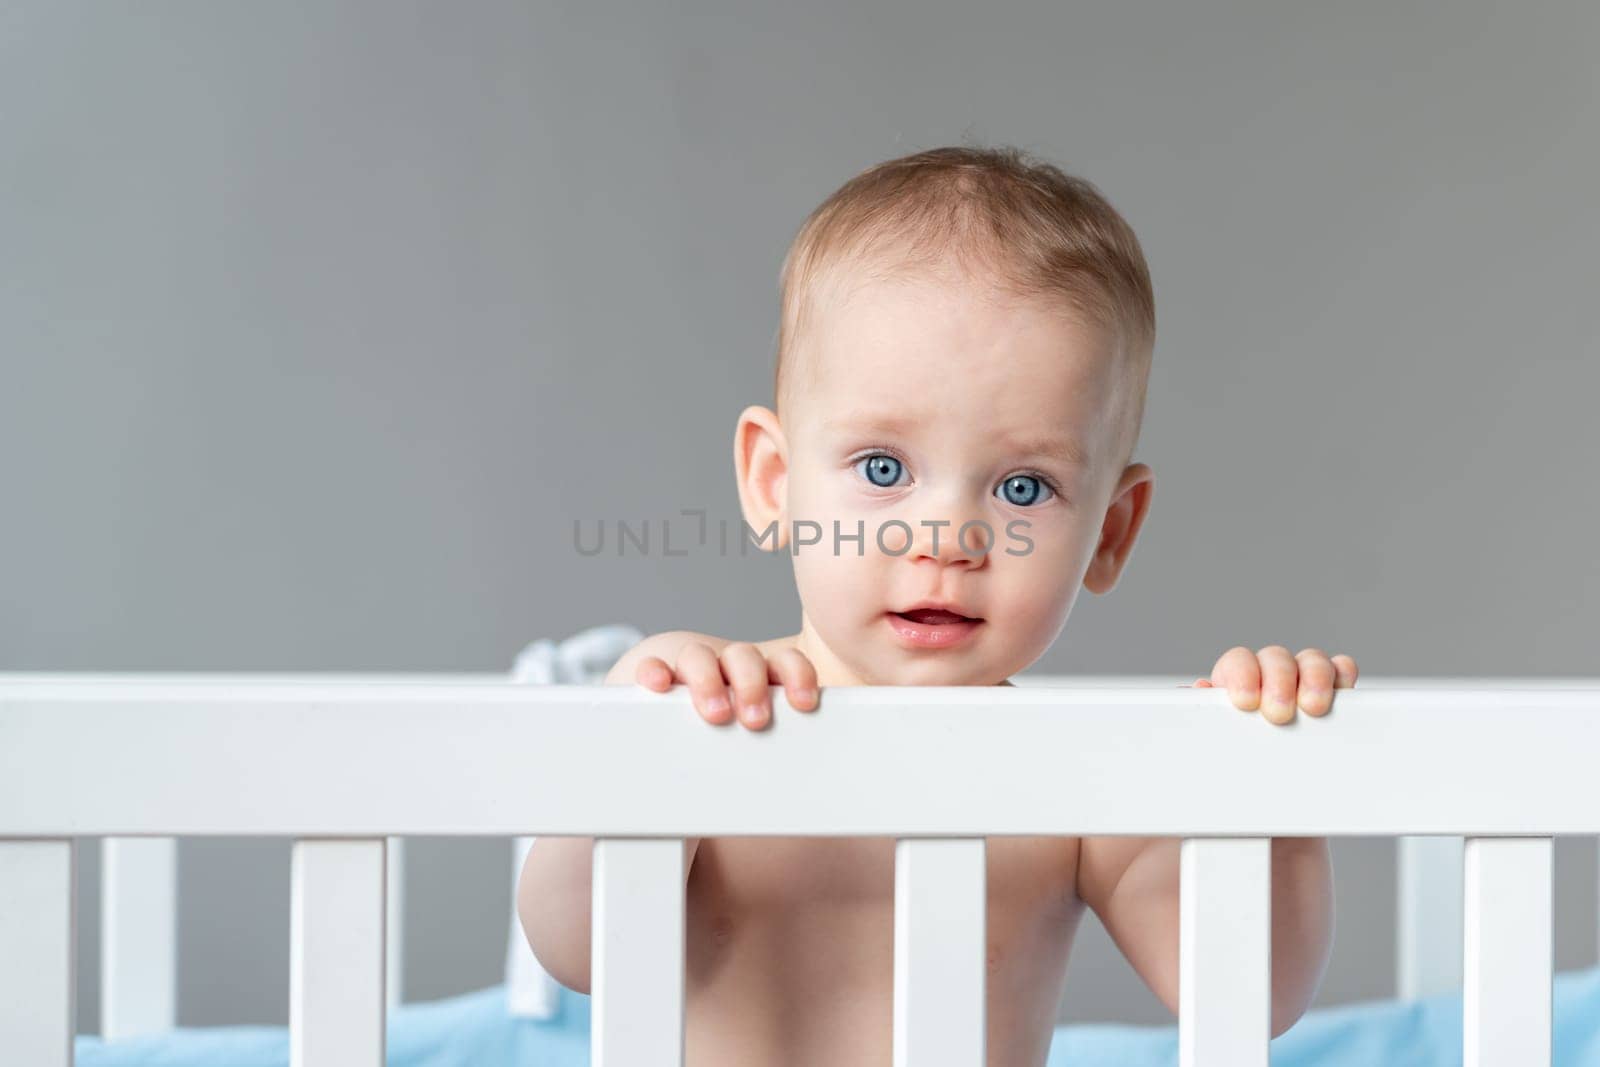 The baby is surprised and pulls himself up on the back of the crib with little effort by sdf_qwe